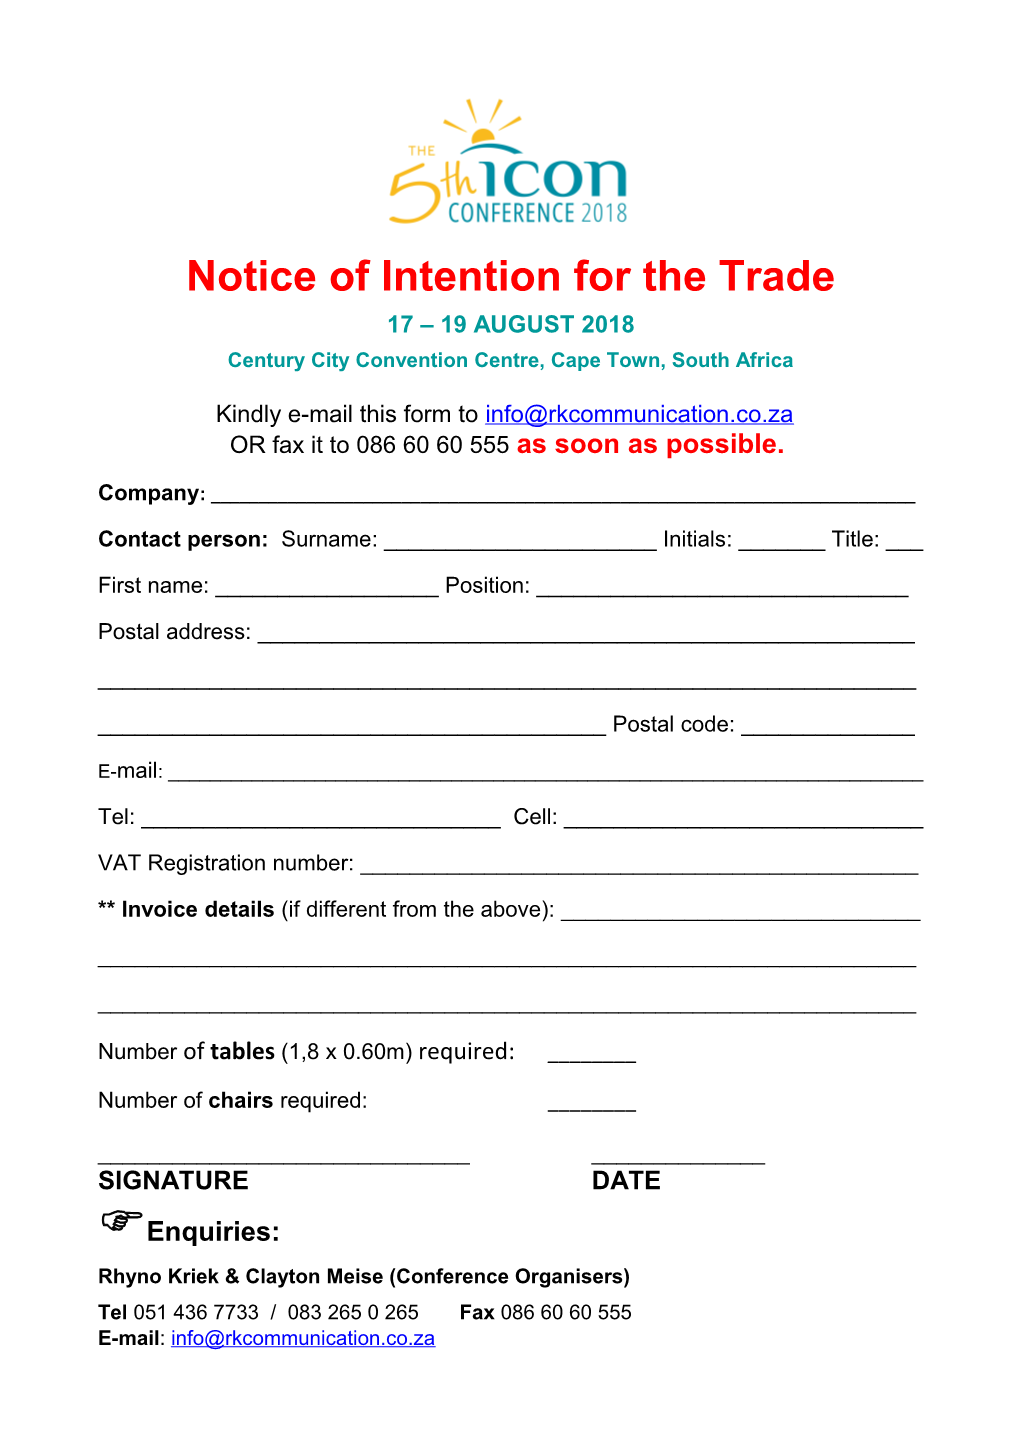 Notice of Intention for the Trade